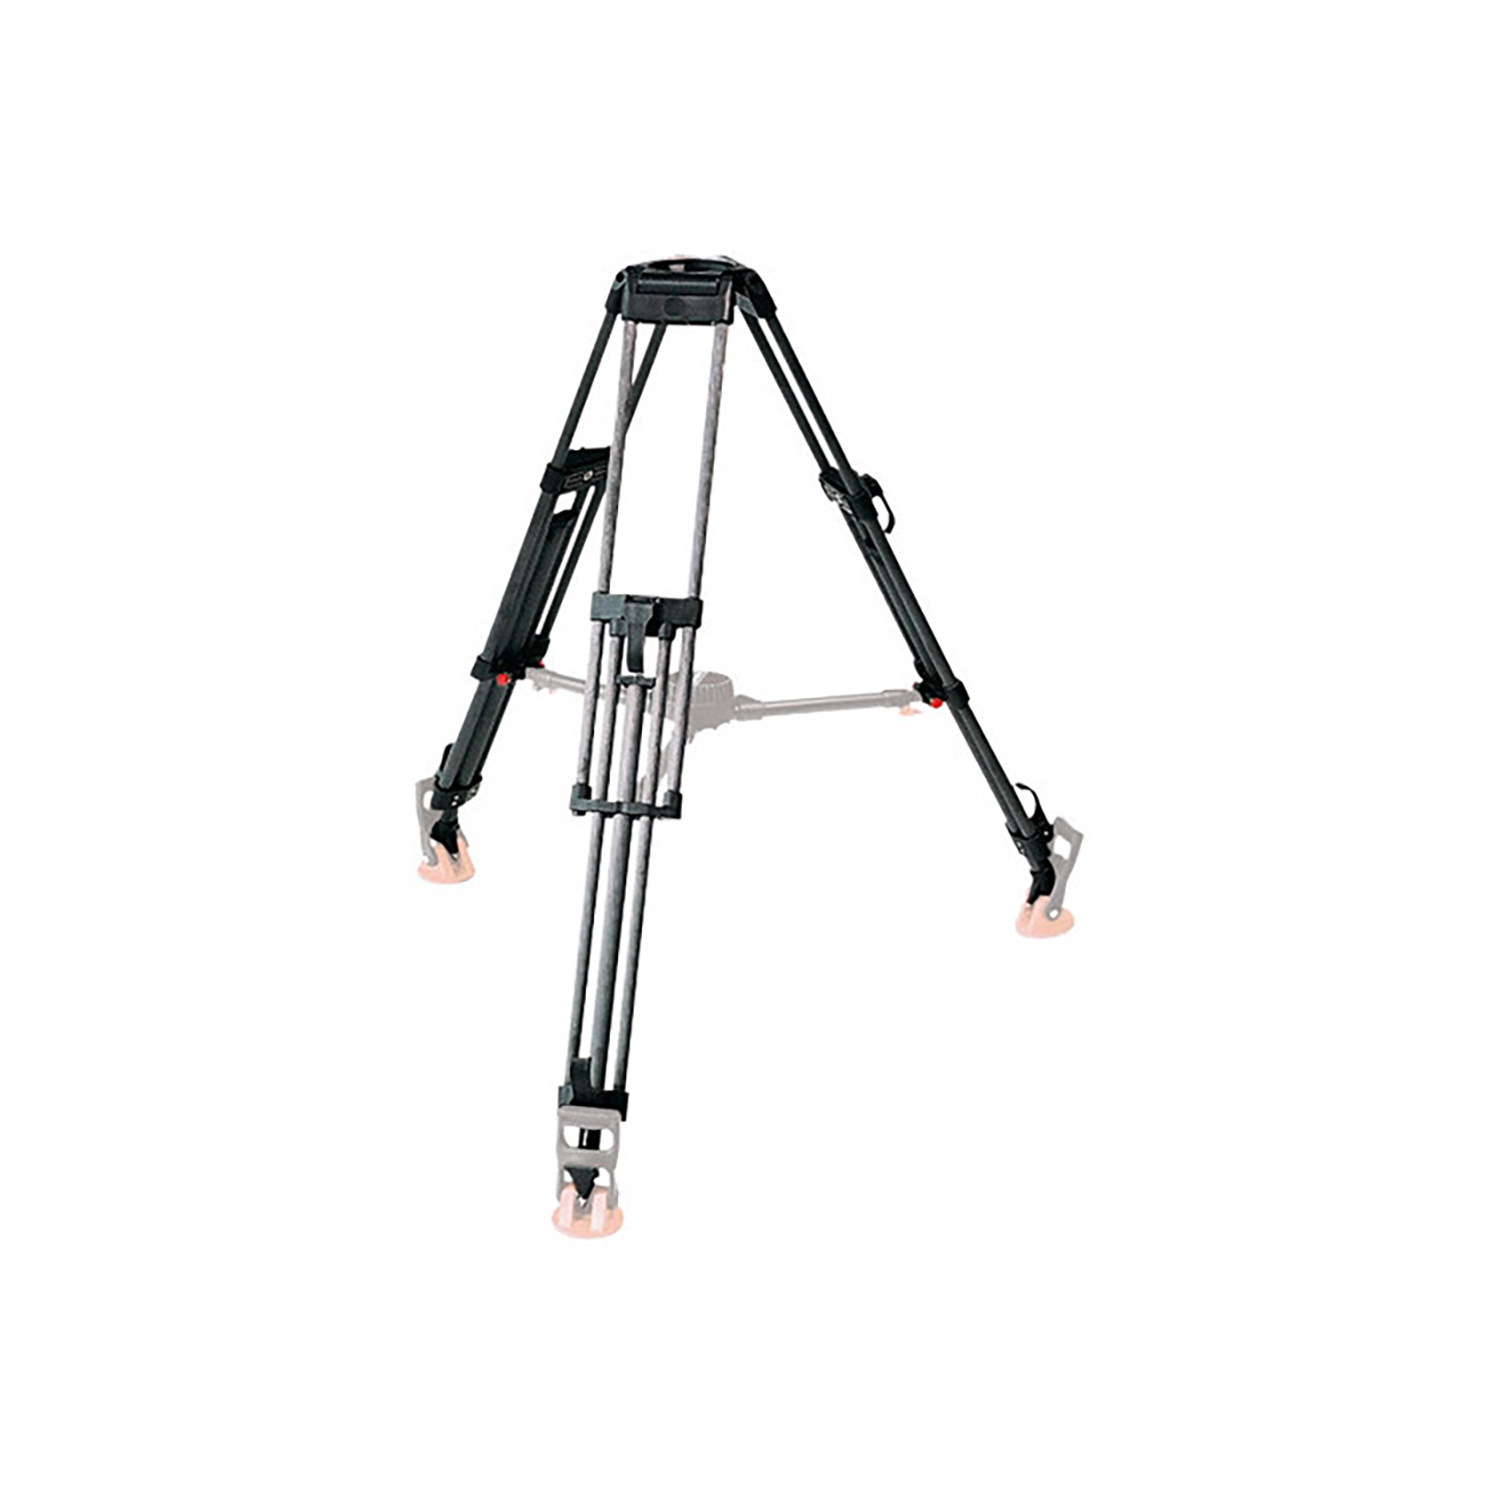 Sachtler CF-100ENG 2CF Carbon Fiber 2-Stage Tripod Legs (100mm Bowl) - Supports 88 lbs